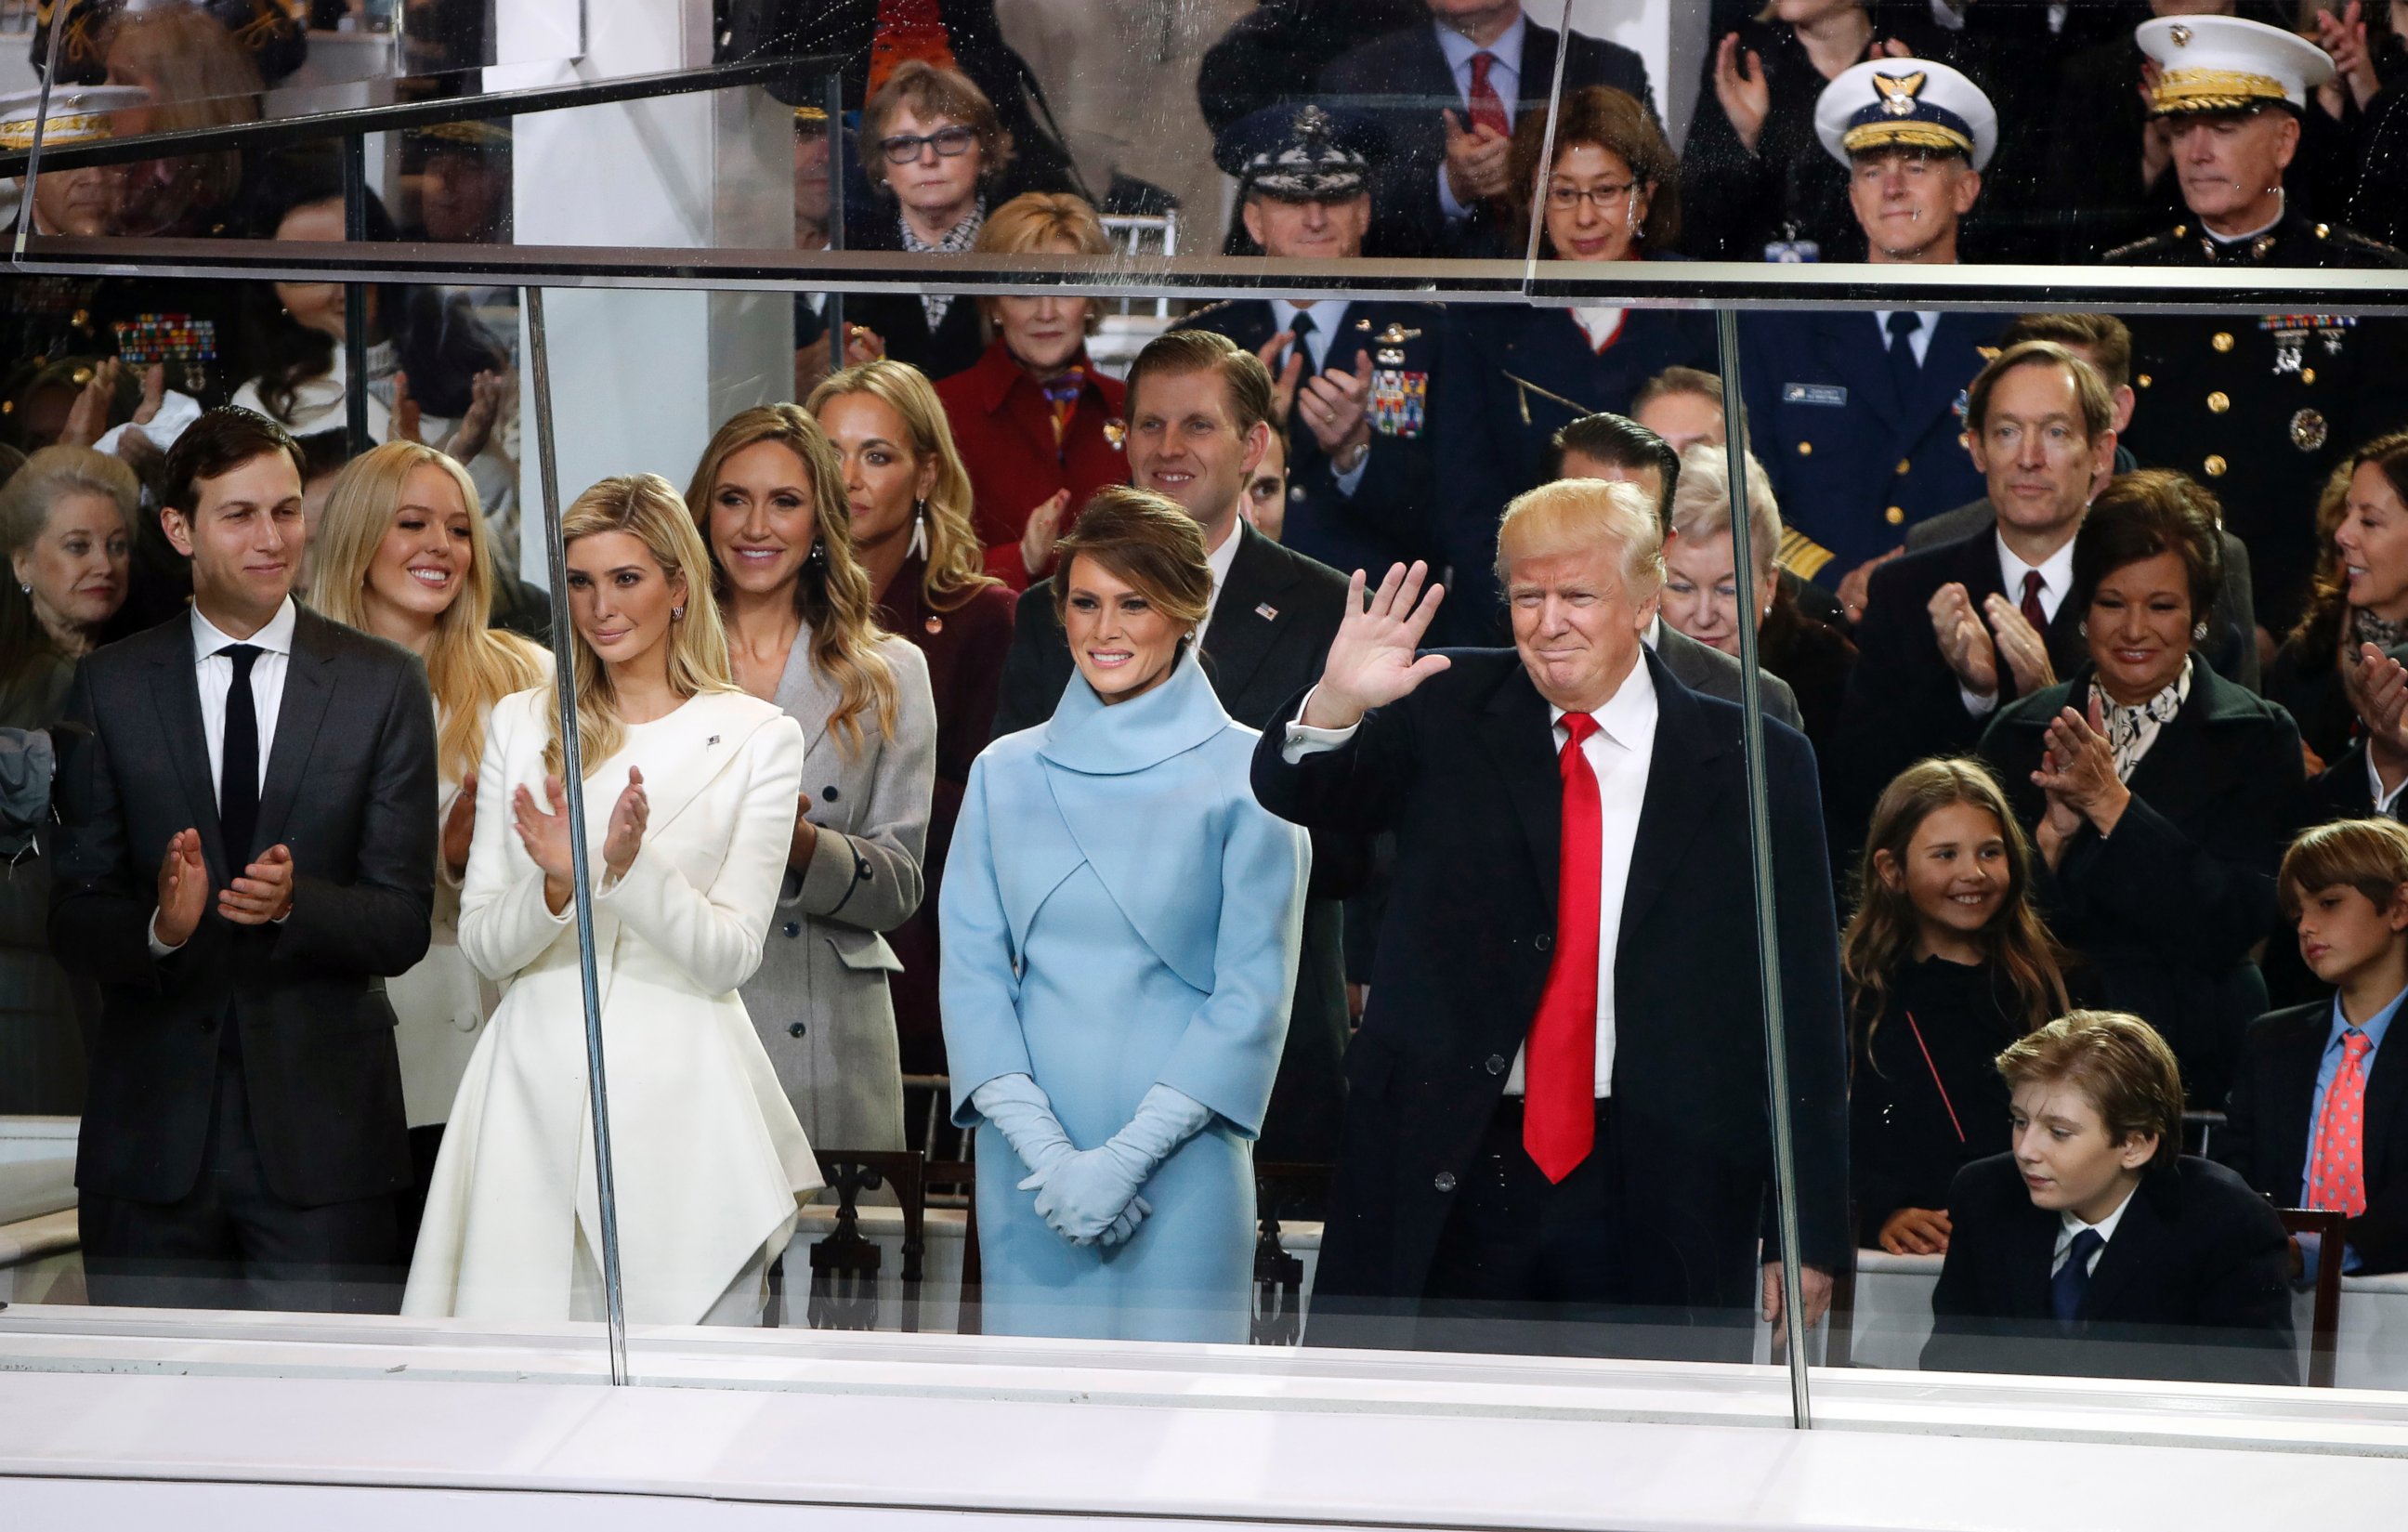 PHOTO: President Donald Trump waves as he is joined by First Lady Melania Trump and his family to view the presidential inauguration parade in Washington, Jan. 20, 2017.